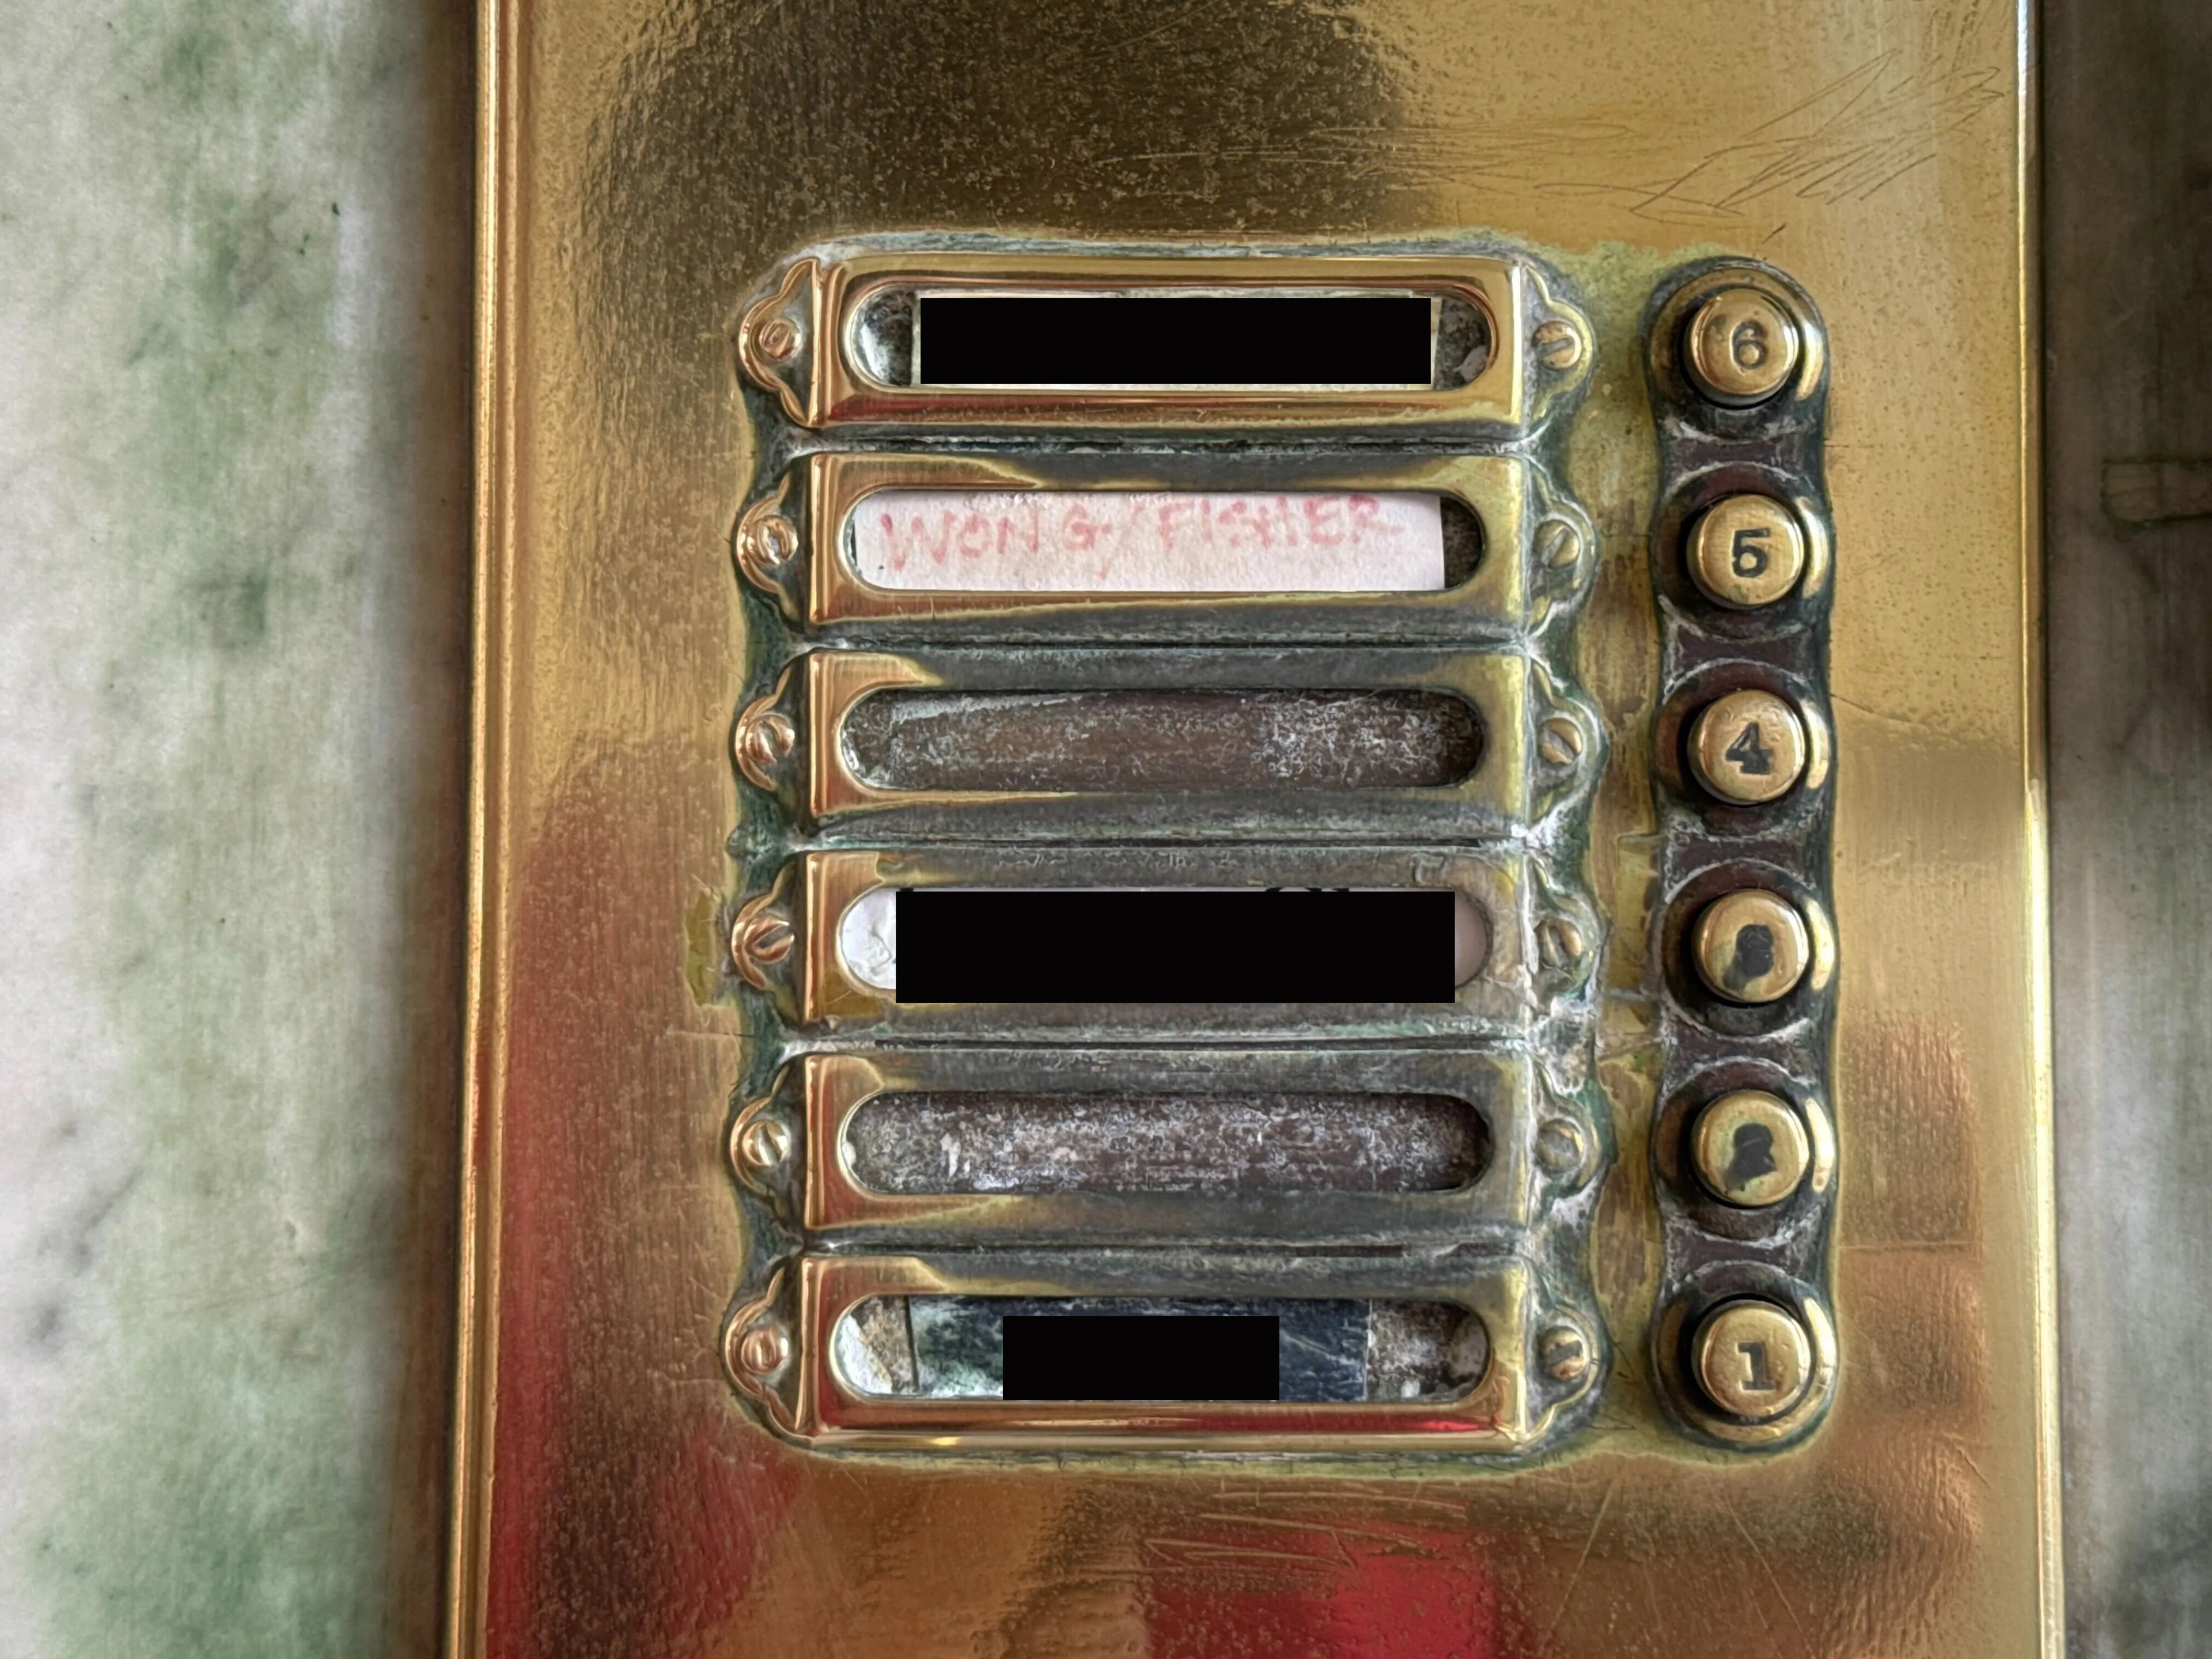 an apartment buzzer shows five buttons with names next to them